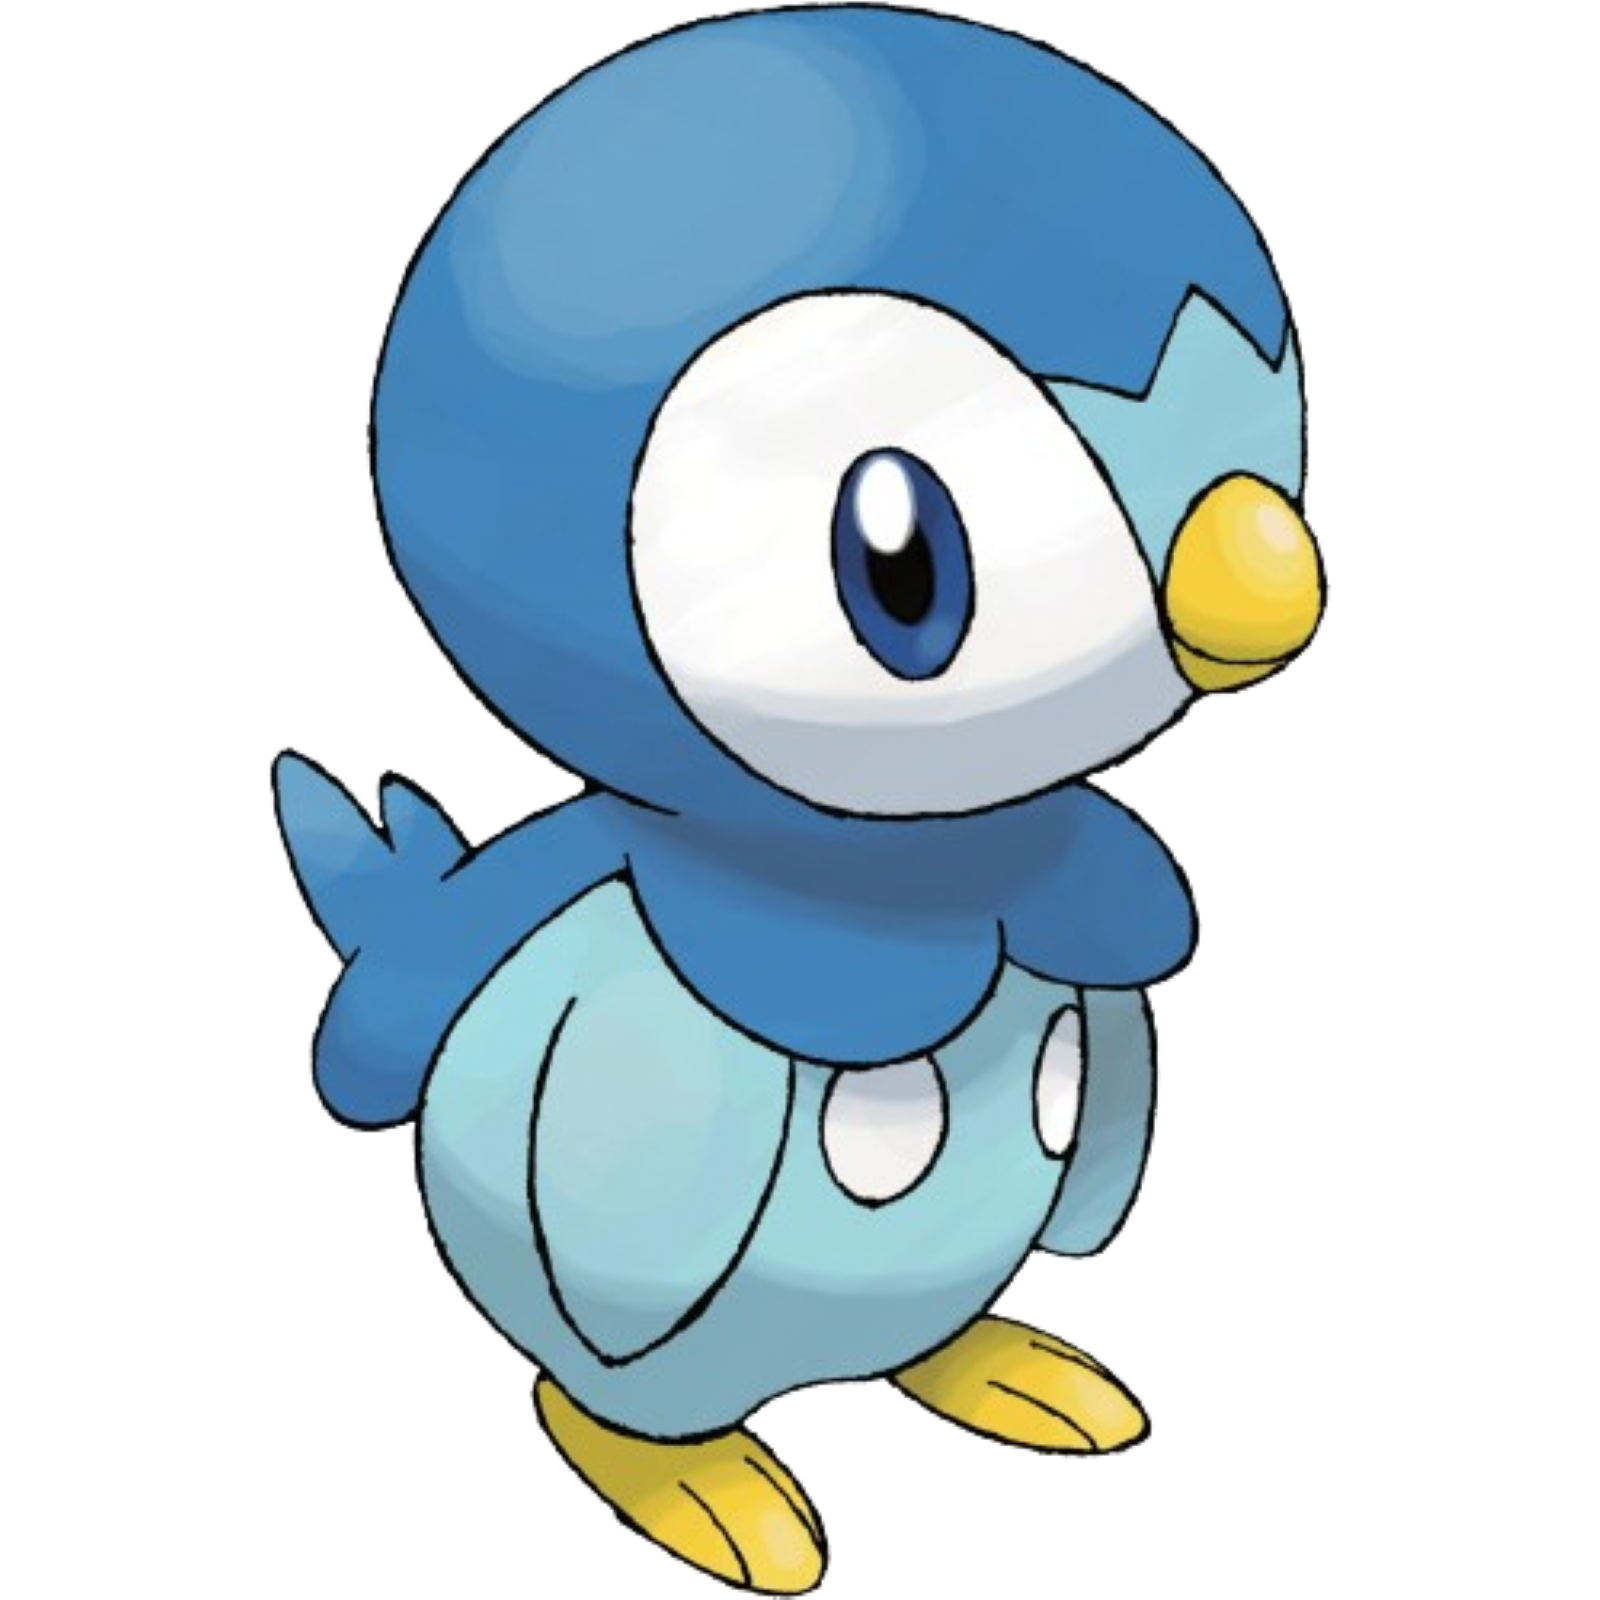 393Piplup